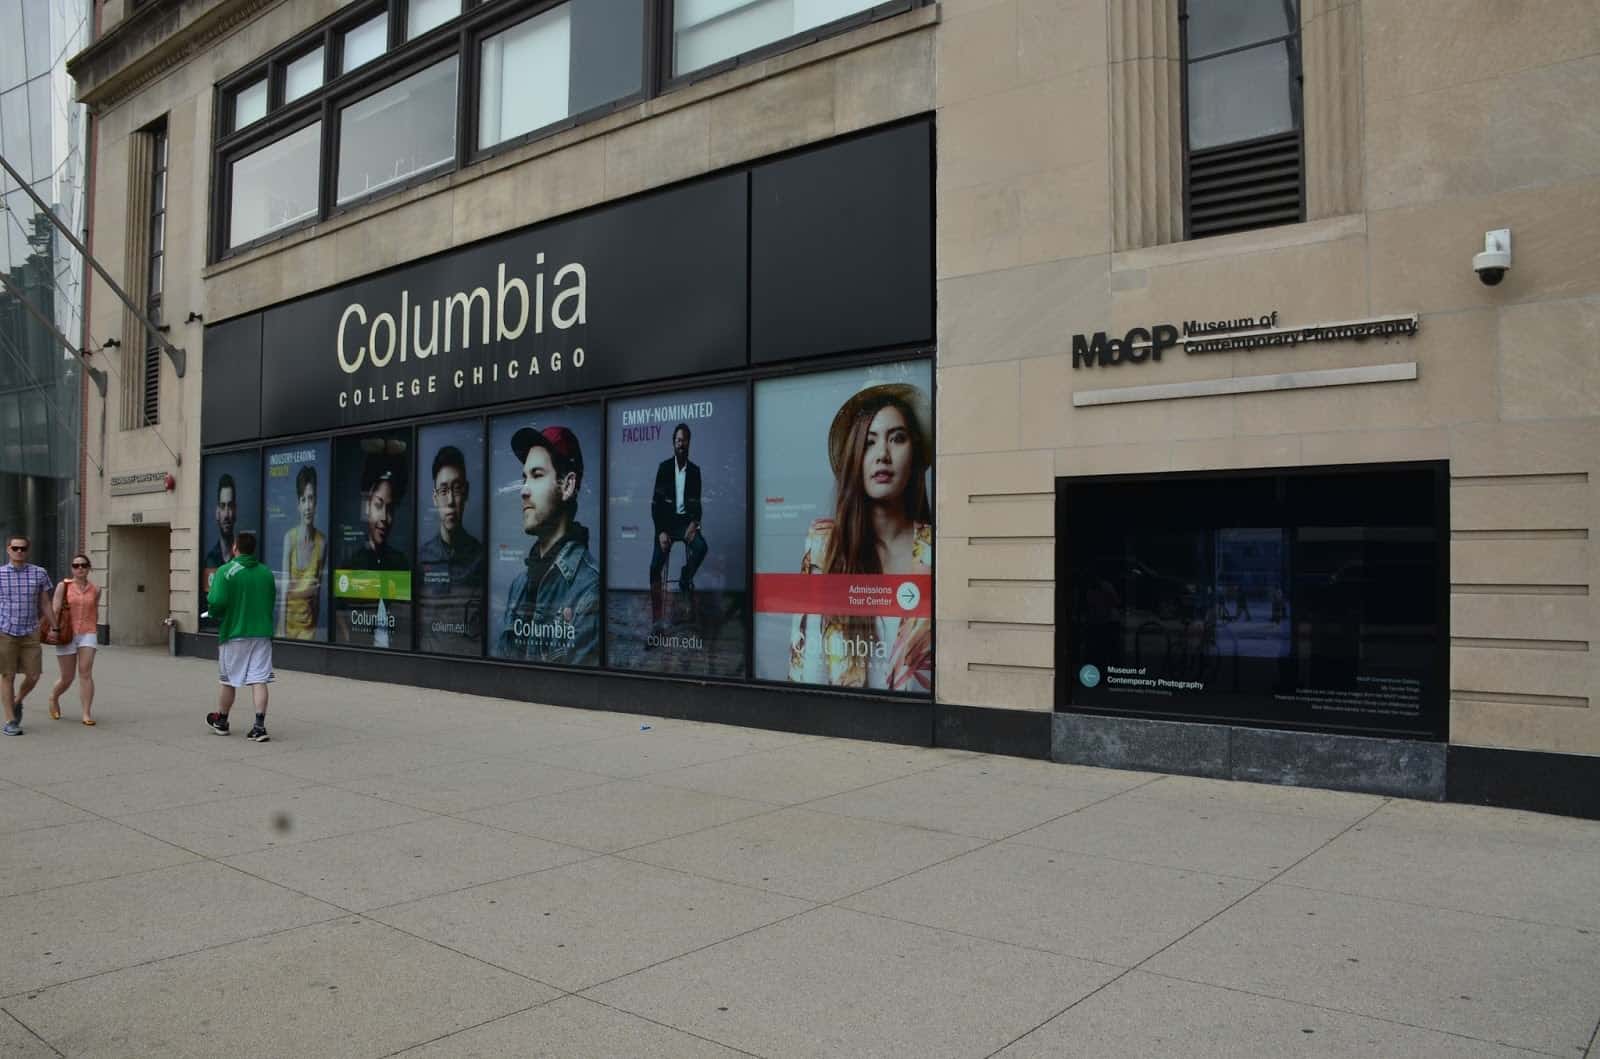 Museum of Contemporary Photography at Columbia College in Chicago